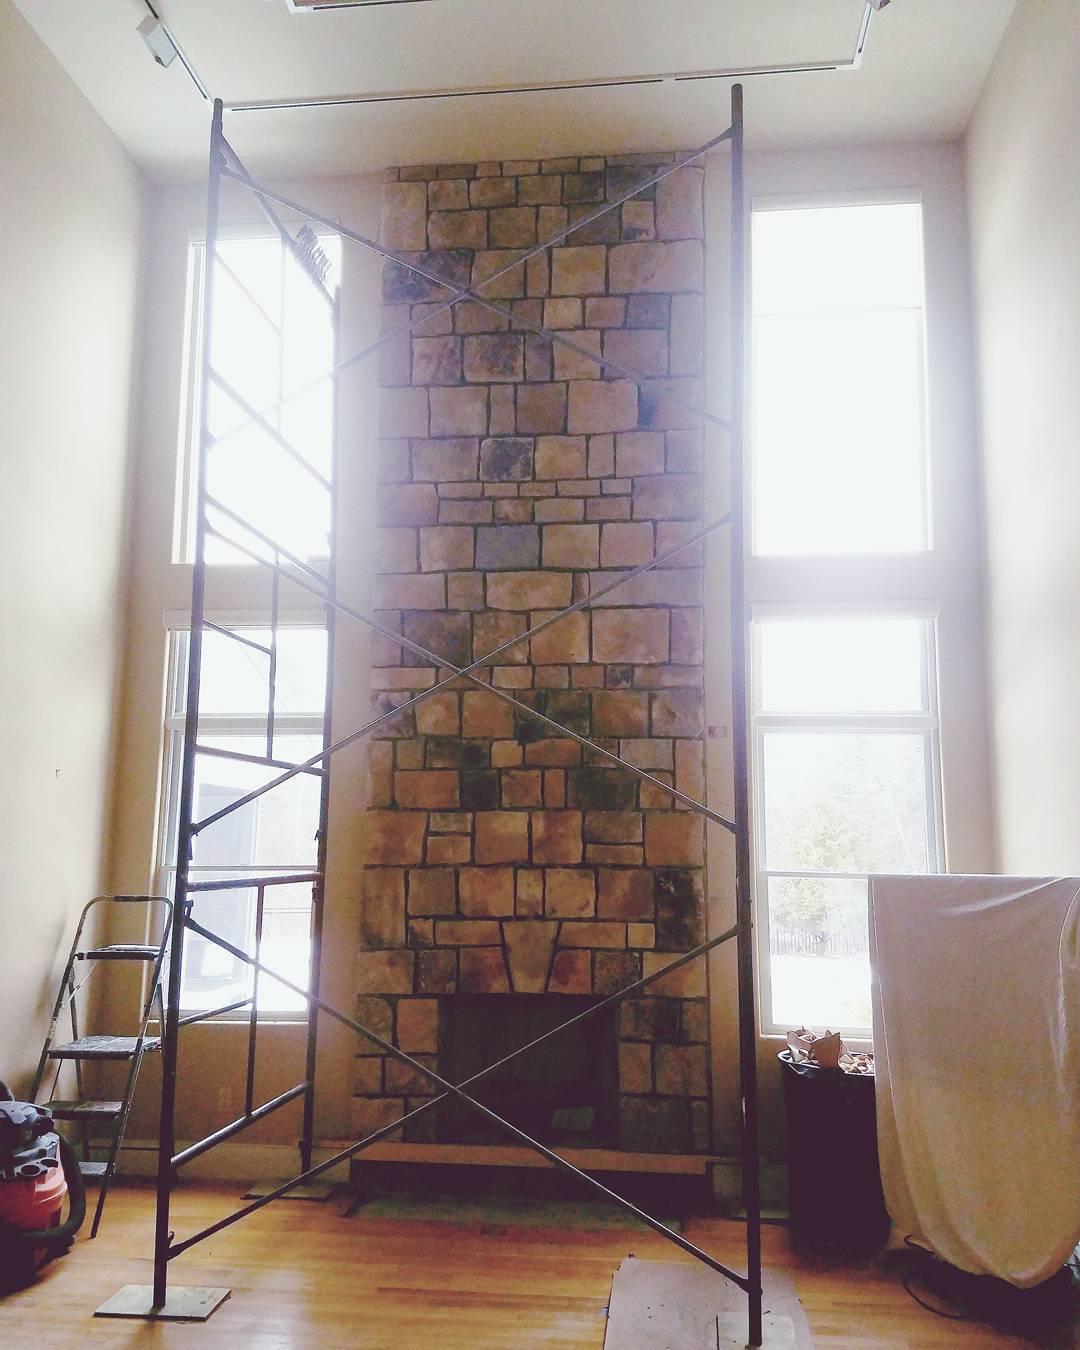 Too tall for the cameraman, this impressive fireplace surround is over 16 feet tall and made from South Bay Quartz thin-cut veneer stone. It makes a nice focal point in this great-room in Cumberland, Maine.